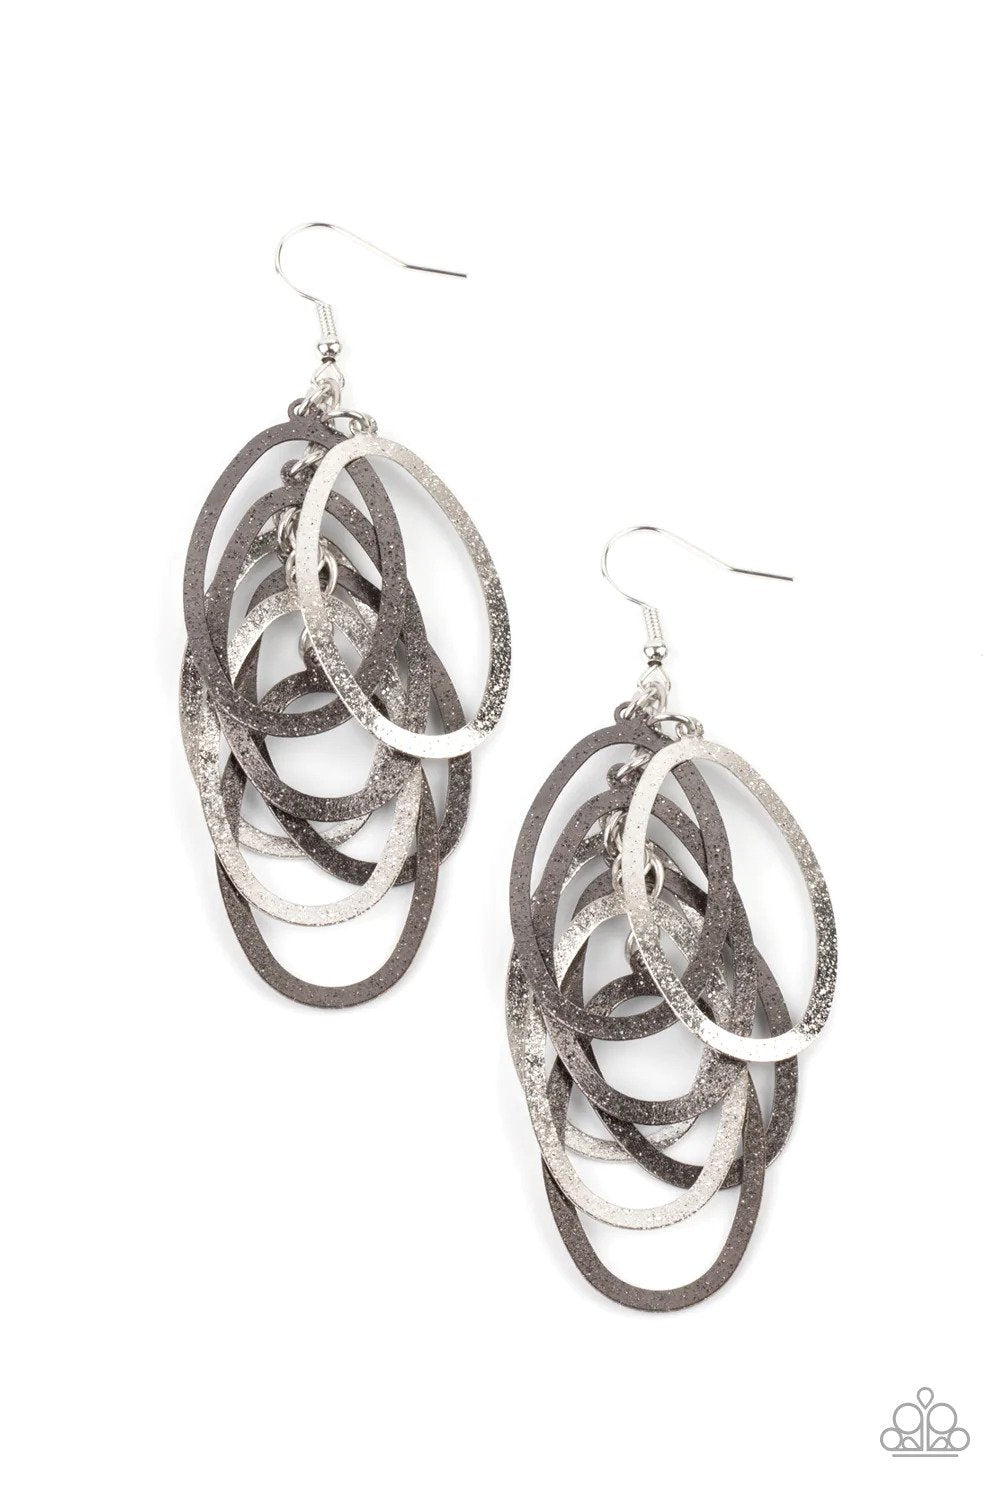 Mind OVAL Matter Multi Earrings - Paparazzi Accessories- lightbox - CarasShop.com - $5 Jewelry by Cara Jewels